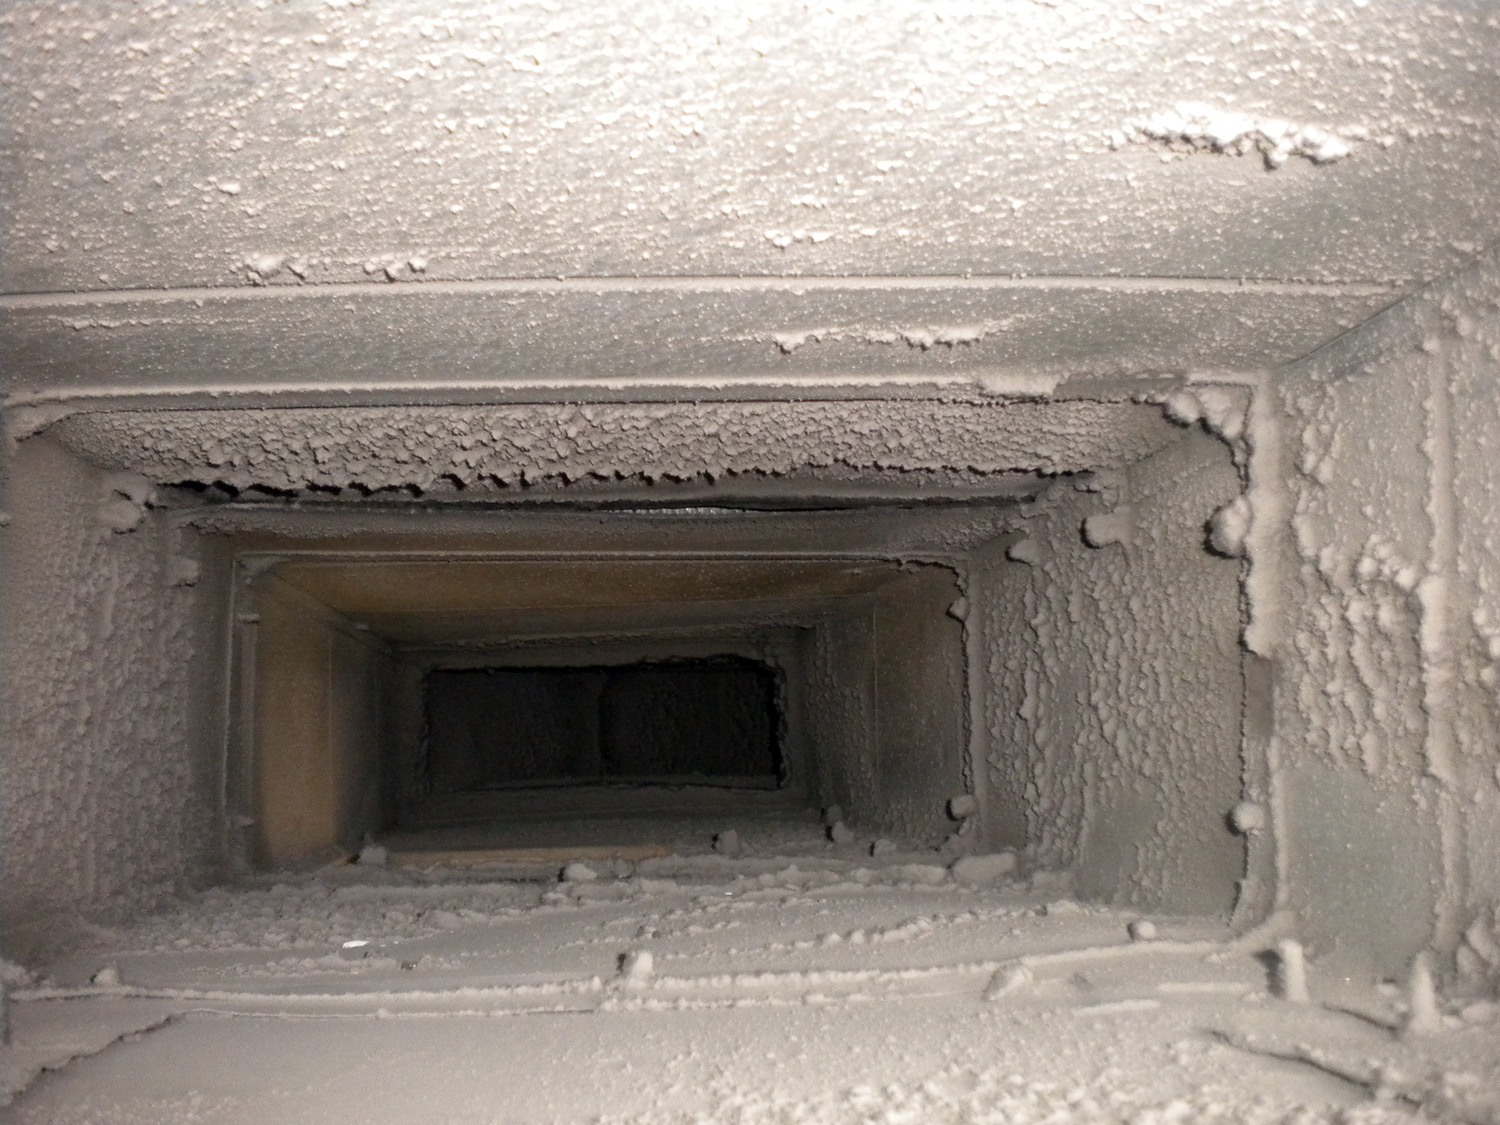 Air duct covered in dust and debris before being cleaned